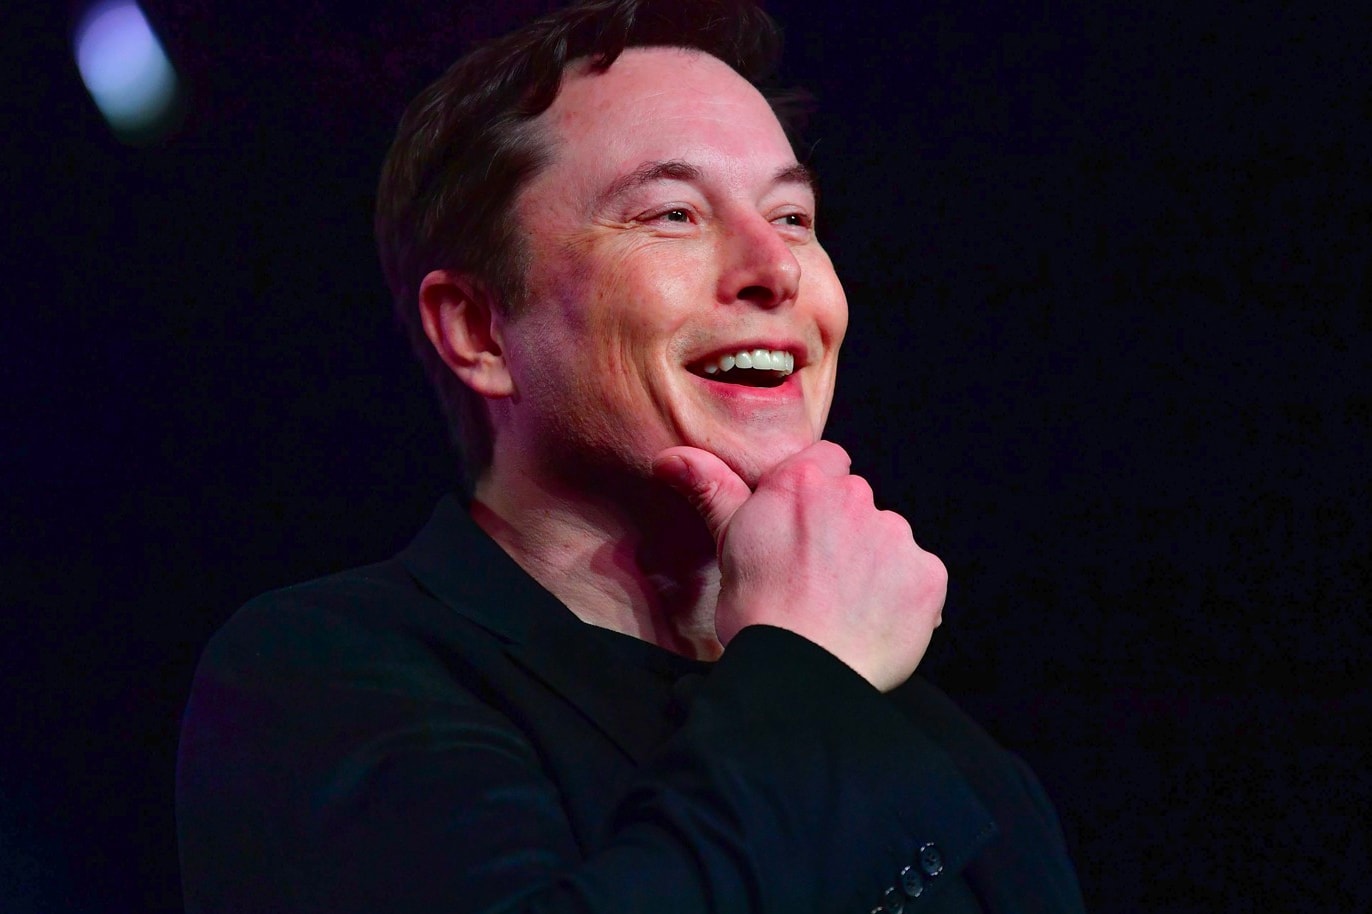 Elon Musk 100 Million USD Donation Twitter CO2 carbon capture technology philanthropic prize spacex founder tesla ceo environmental emissions sustainability info